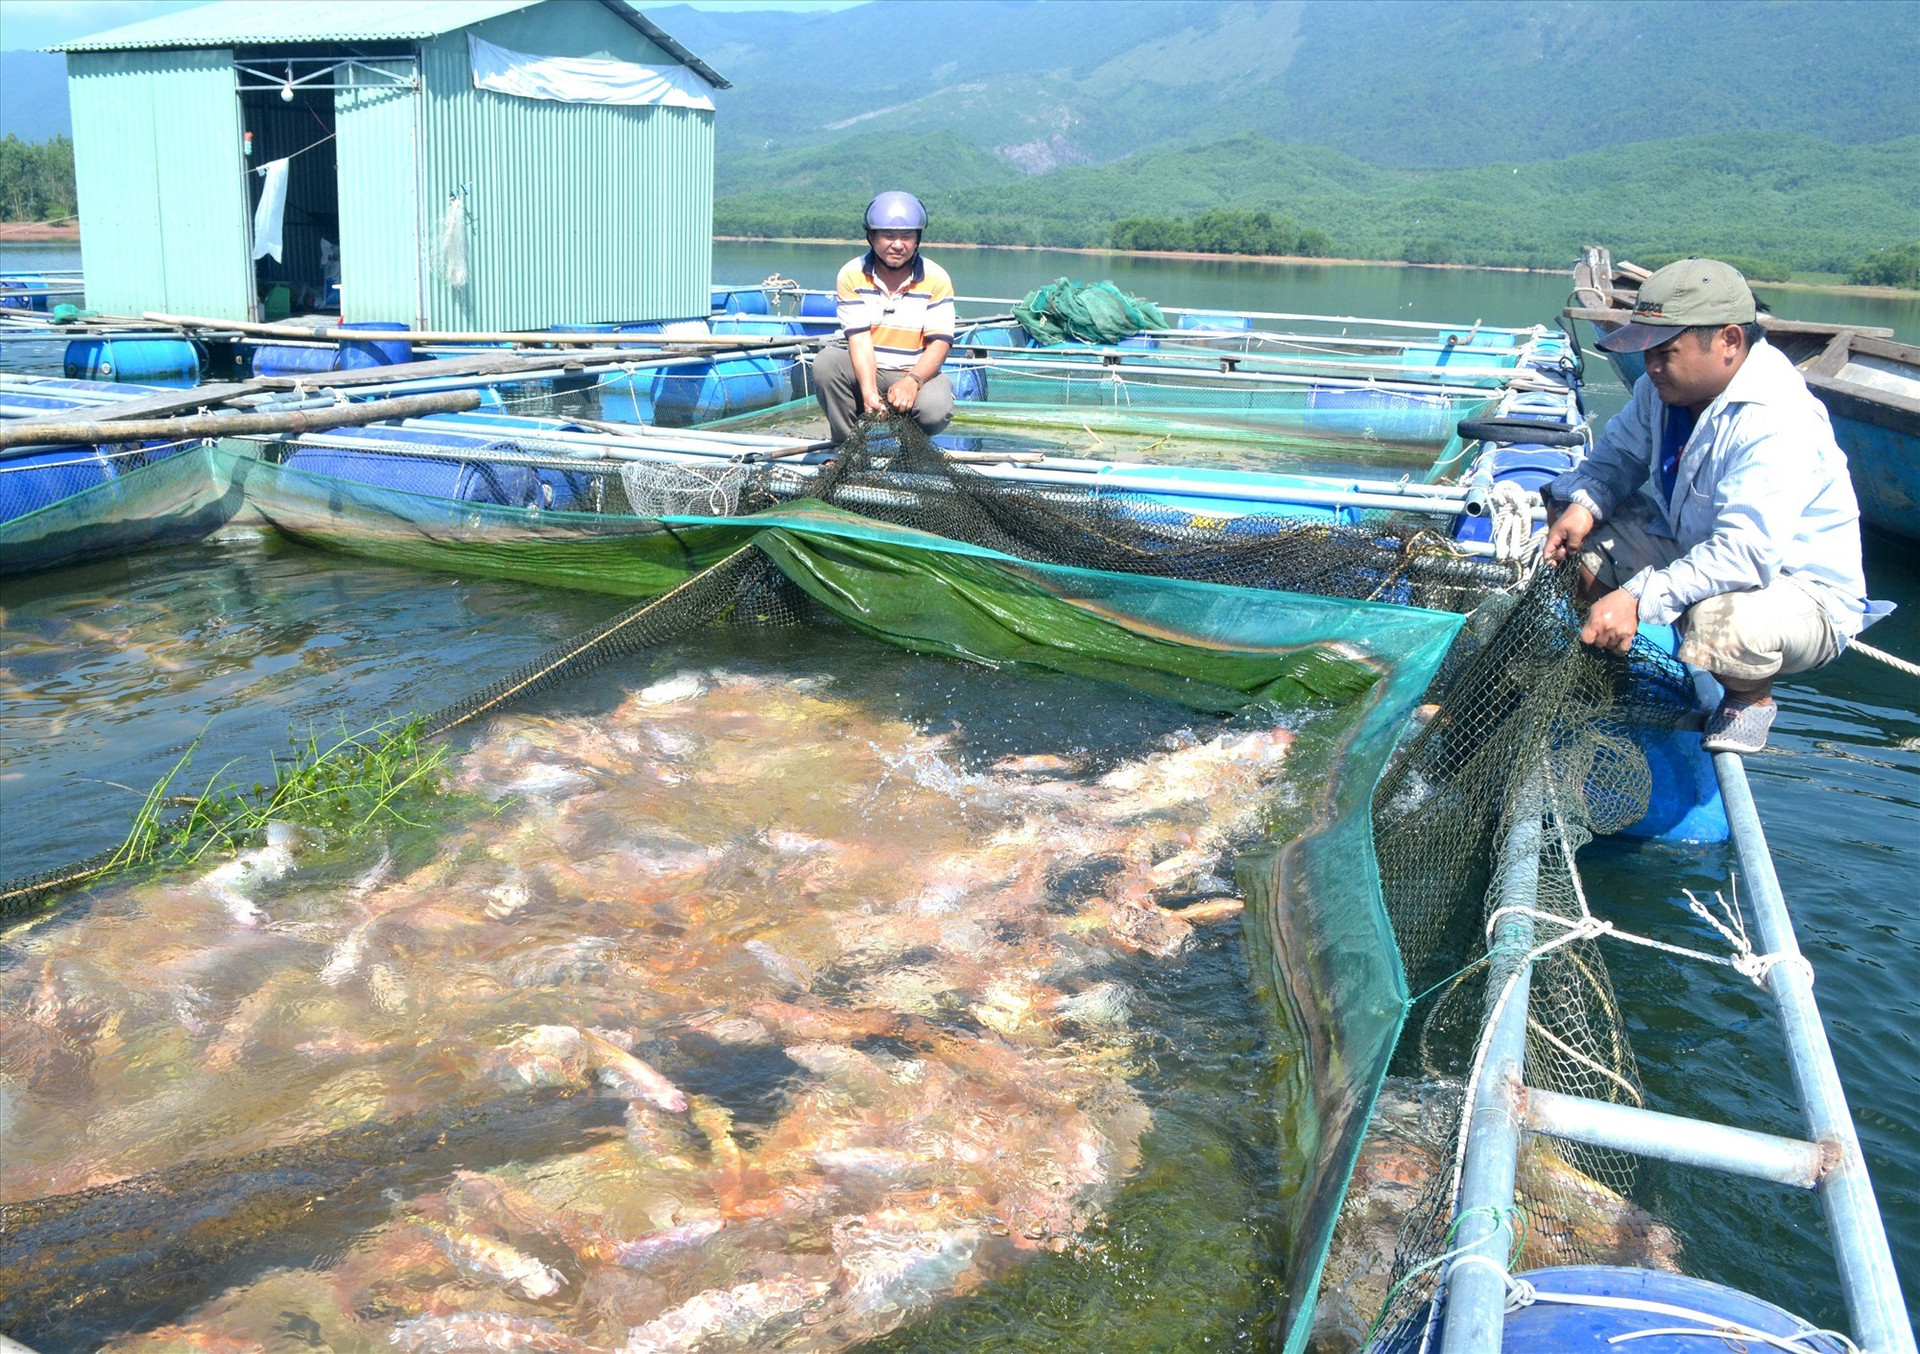 Difficulties in freshwater fish farming due to climate change